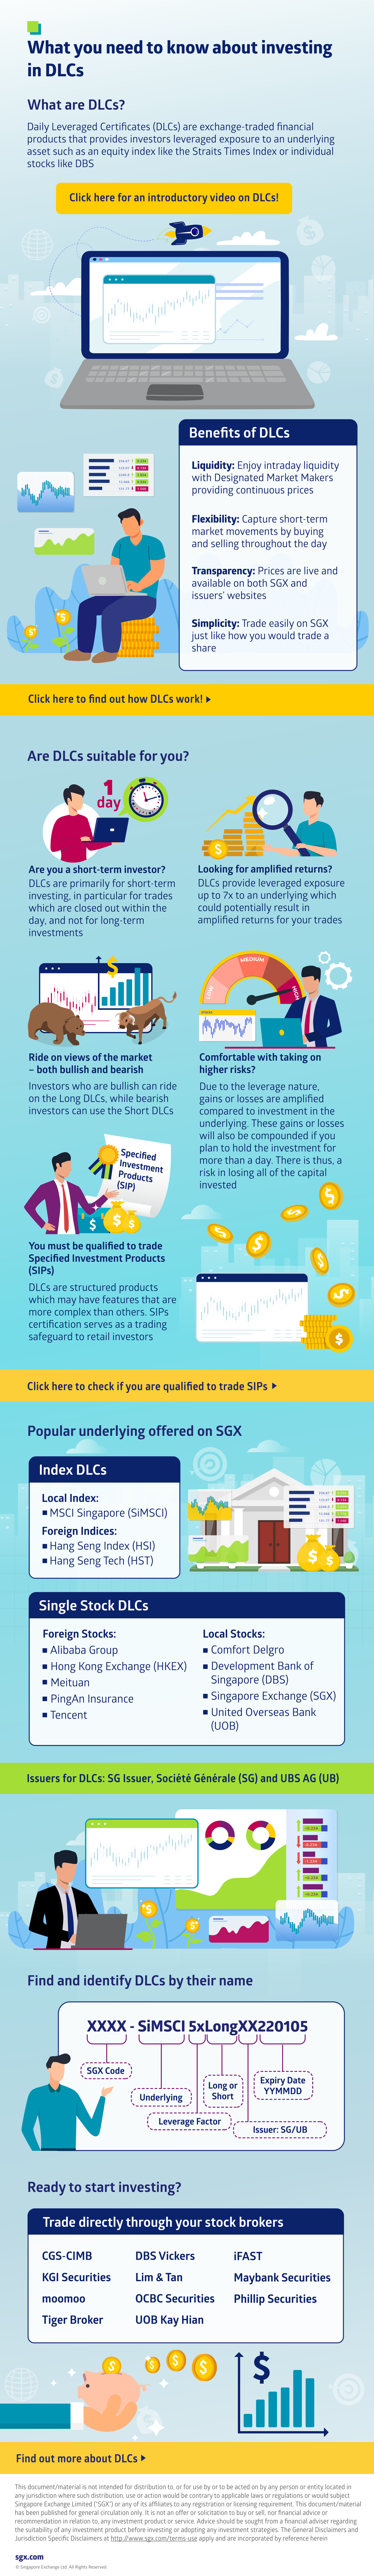 What you need to know about investing in DLCs